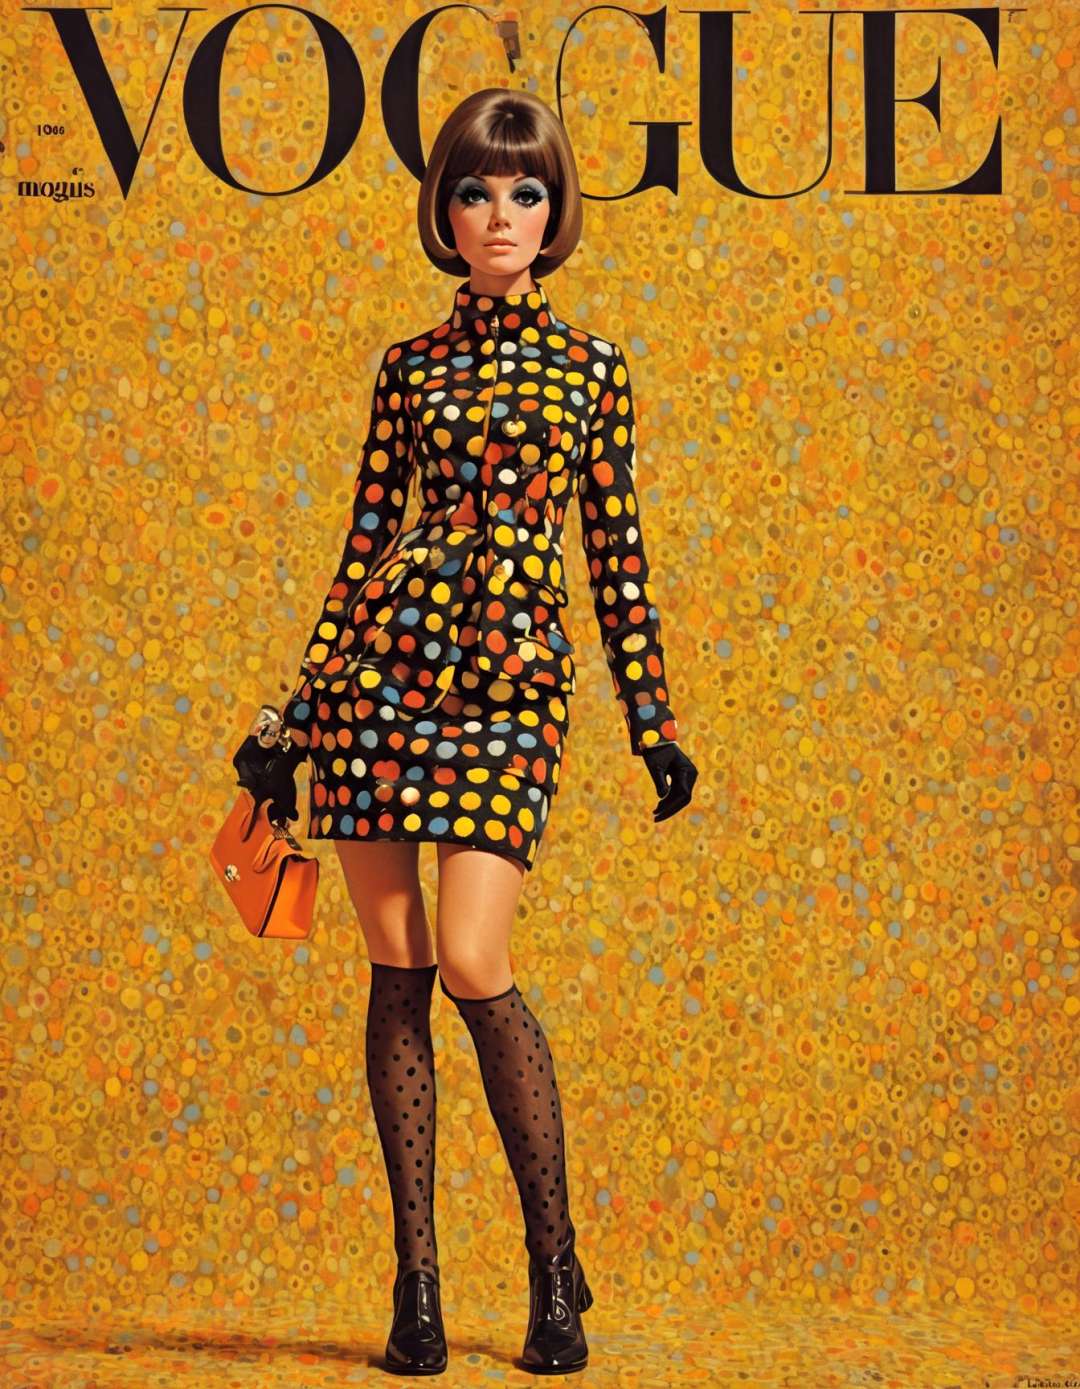 She go-go boots, polka dot miniskirt, bold colors, playful accessories, retro glamour, Harper's Bazaar 60s Edition, iconic Mary Quant fashion.,highly intricate,(VOGUE Cover Magazine:1.15),1968, 60s, black letters, hyper detailed, photorealistic,,